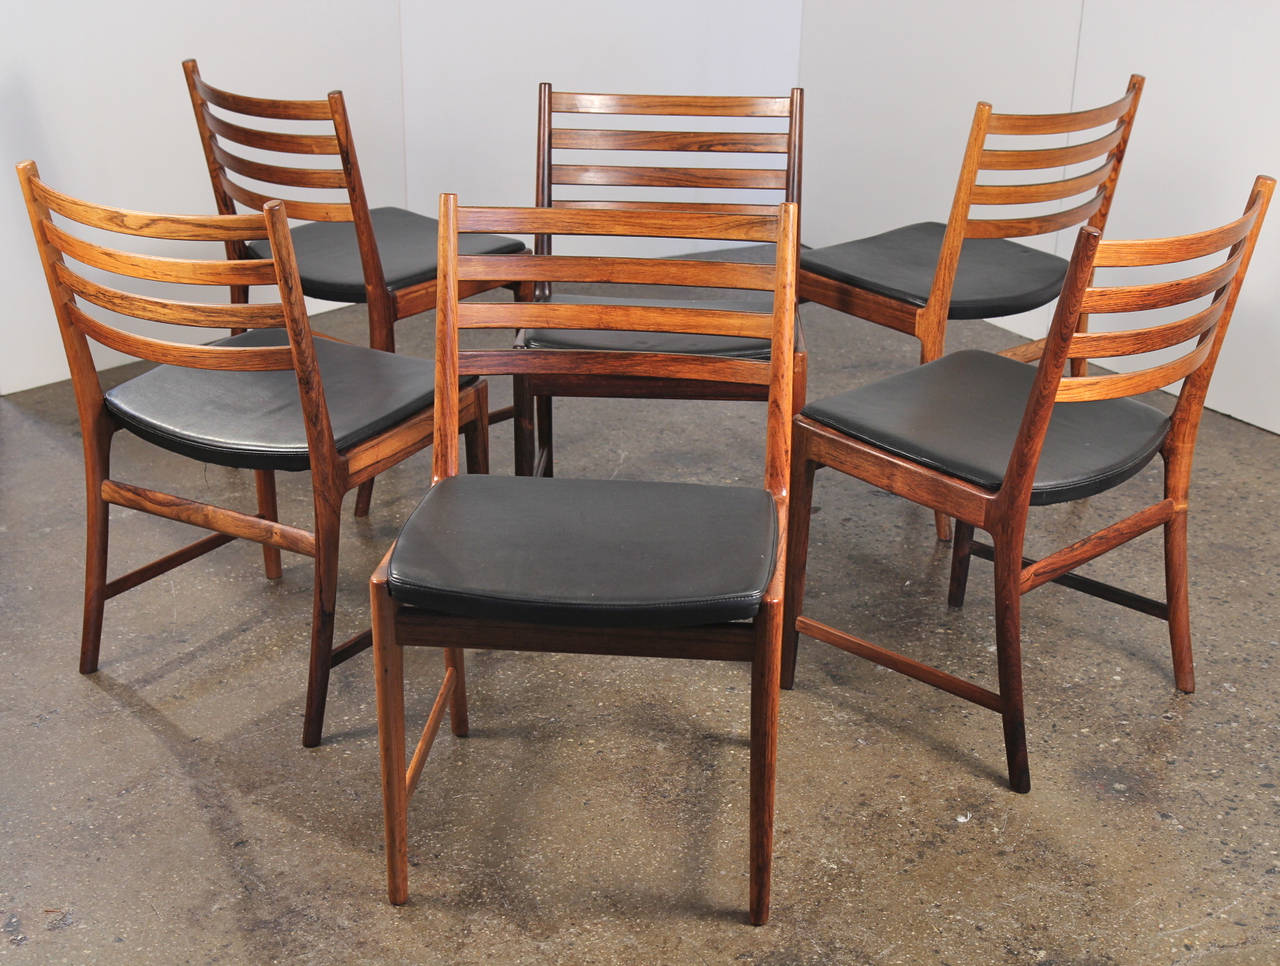 Set of six Danish modern dining chairs feature ladder backs and leather seats. These chairs are stylish, comfortable, and finely crafted. In excellent vintage condition. Attributed to Ole Wanscher. Denmark, 1960s.

19